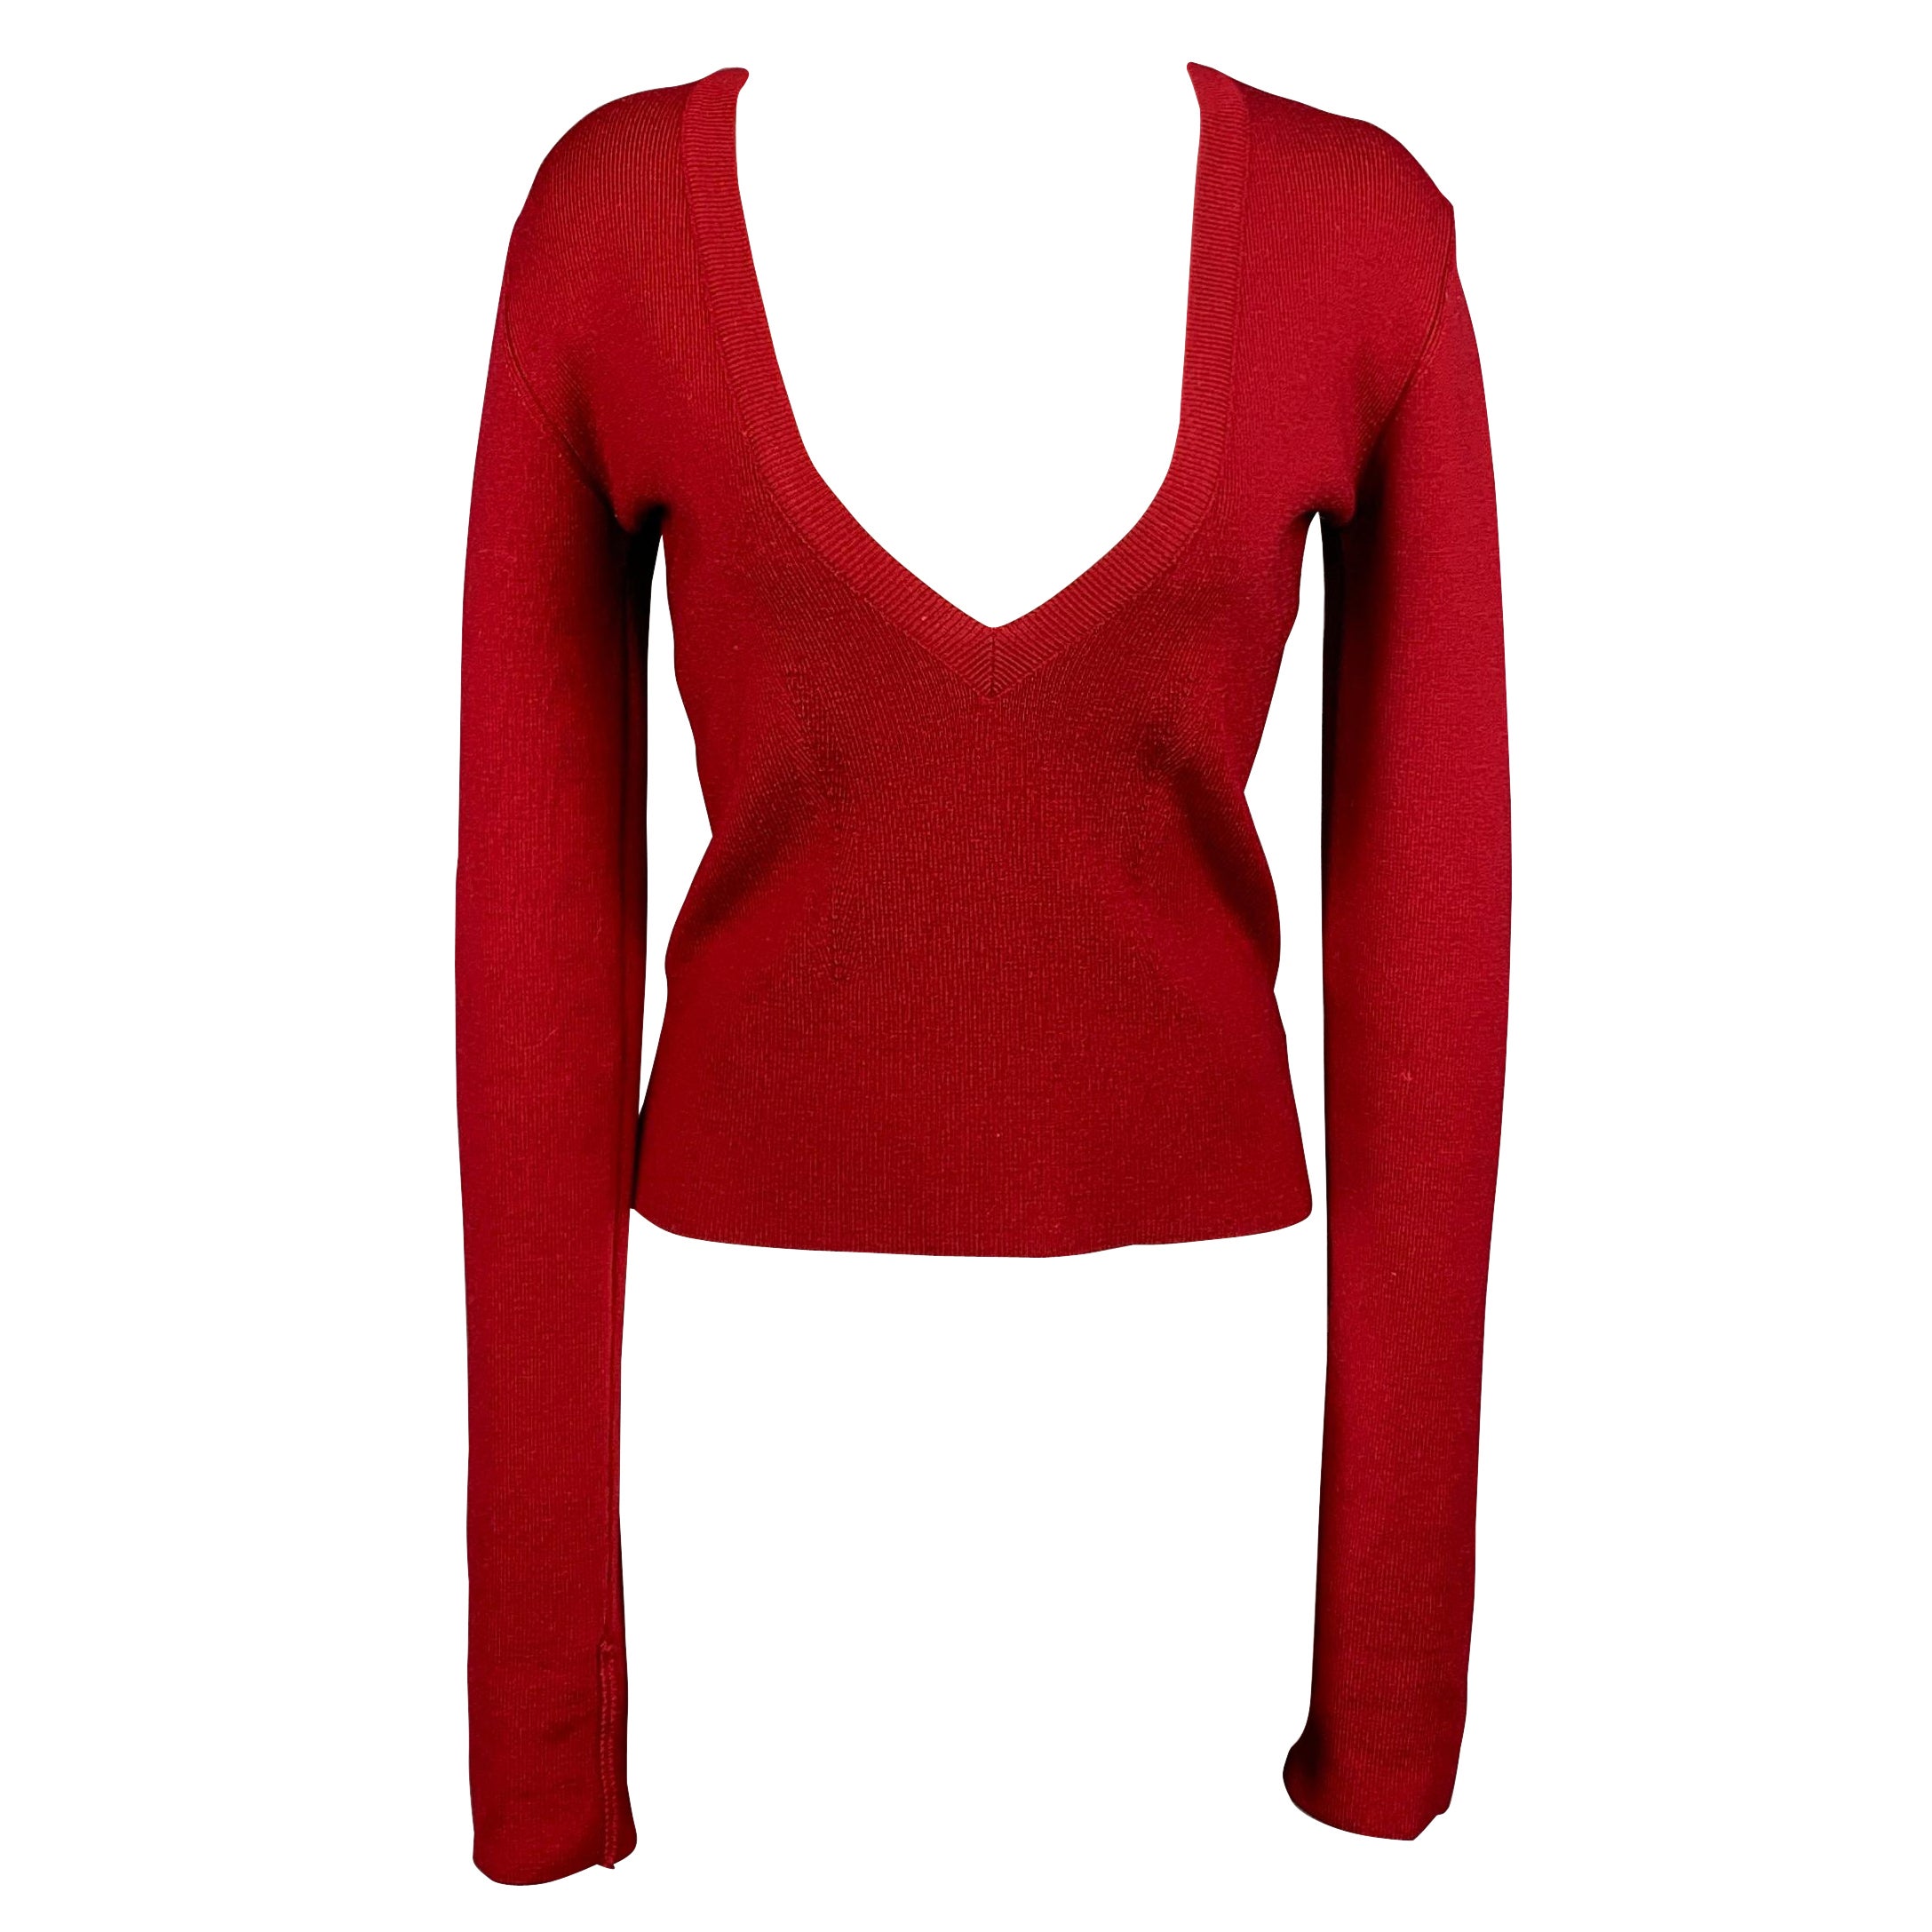 DSquared2 Early 2000s Lipstick Red Wool Sleeveless Cardigan Sweater ...